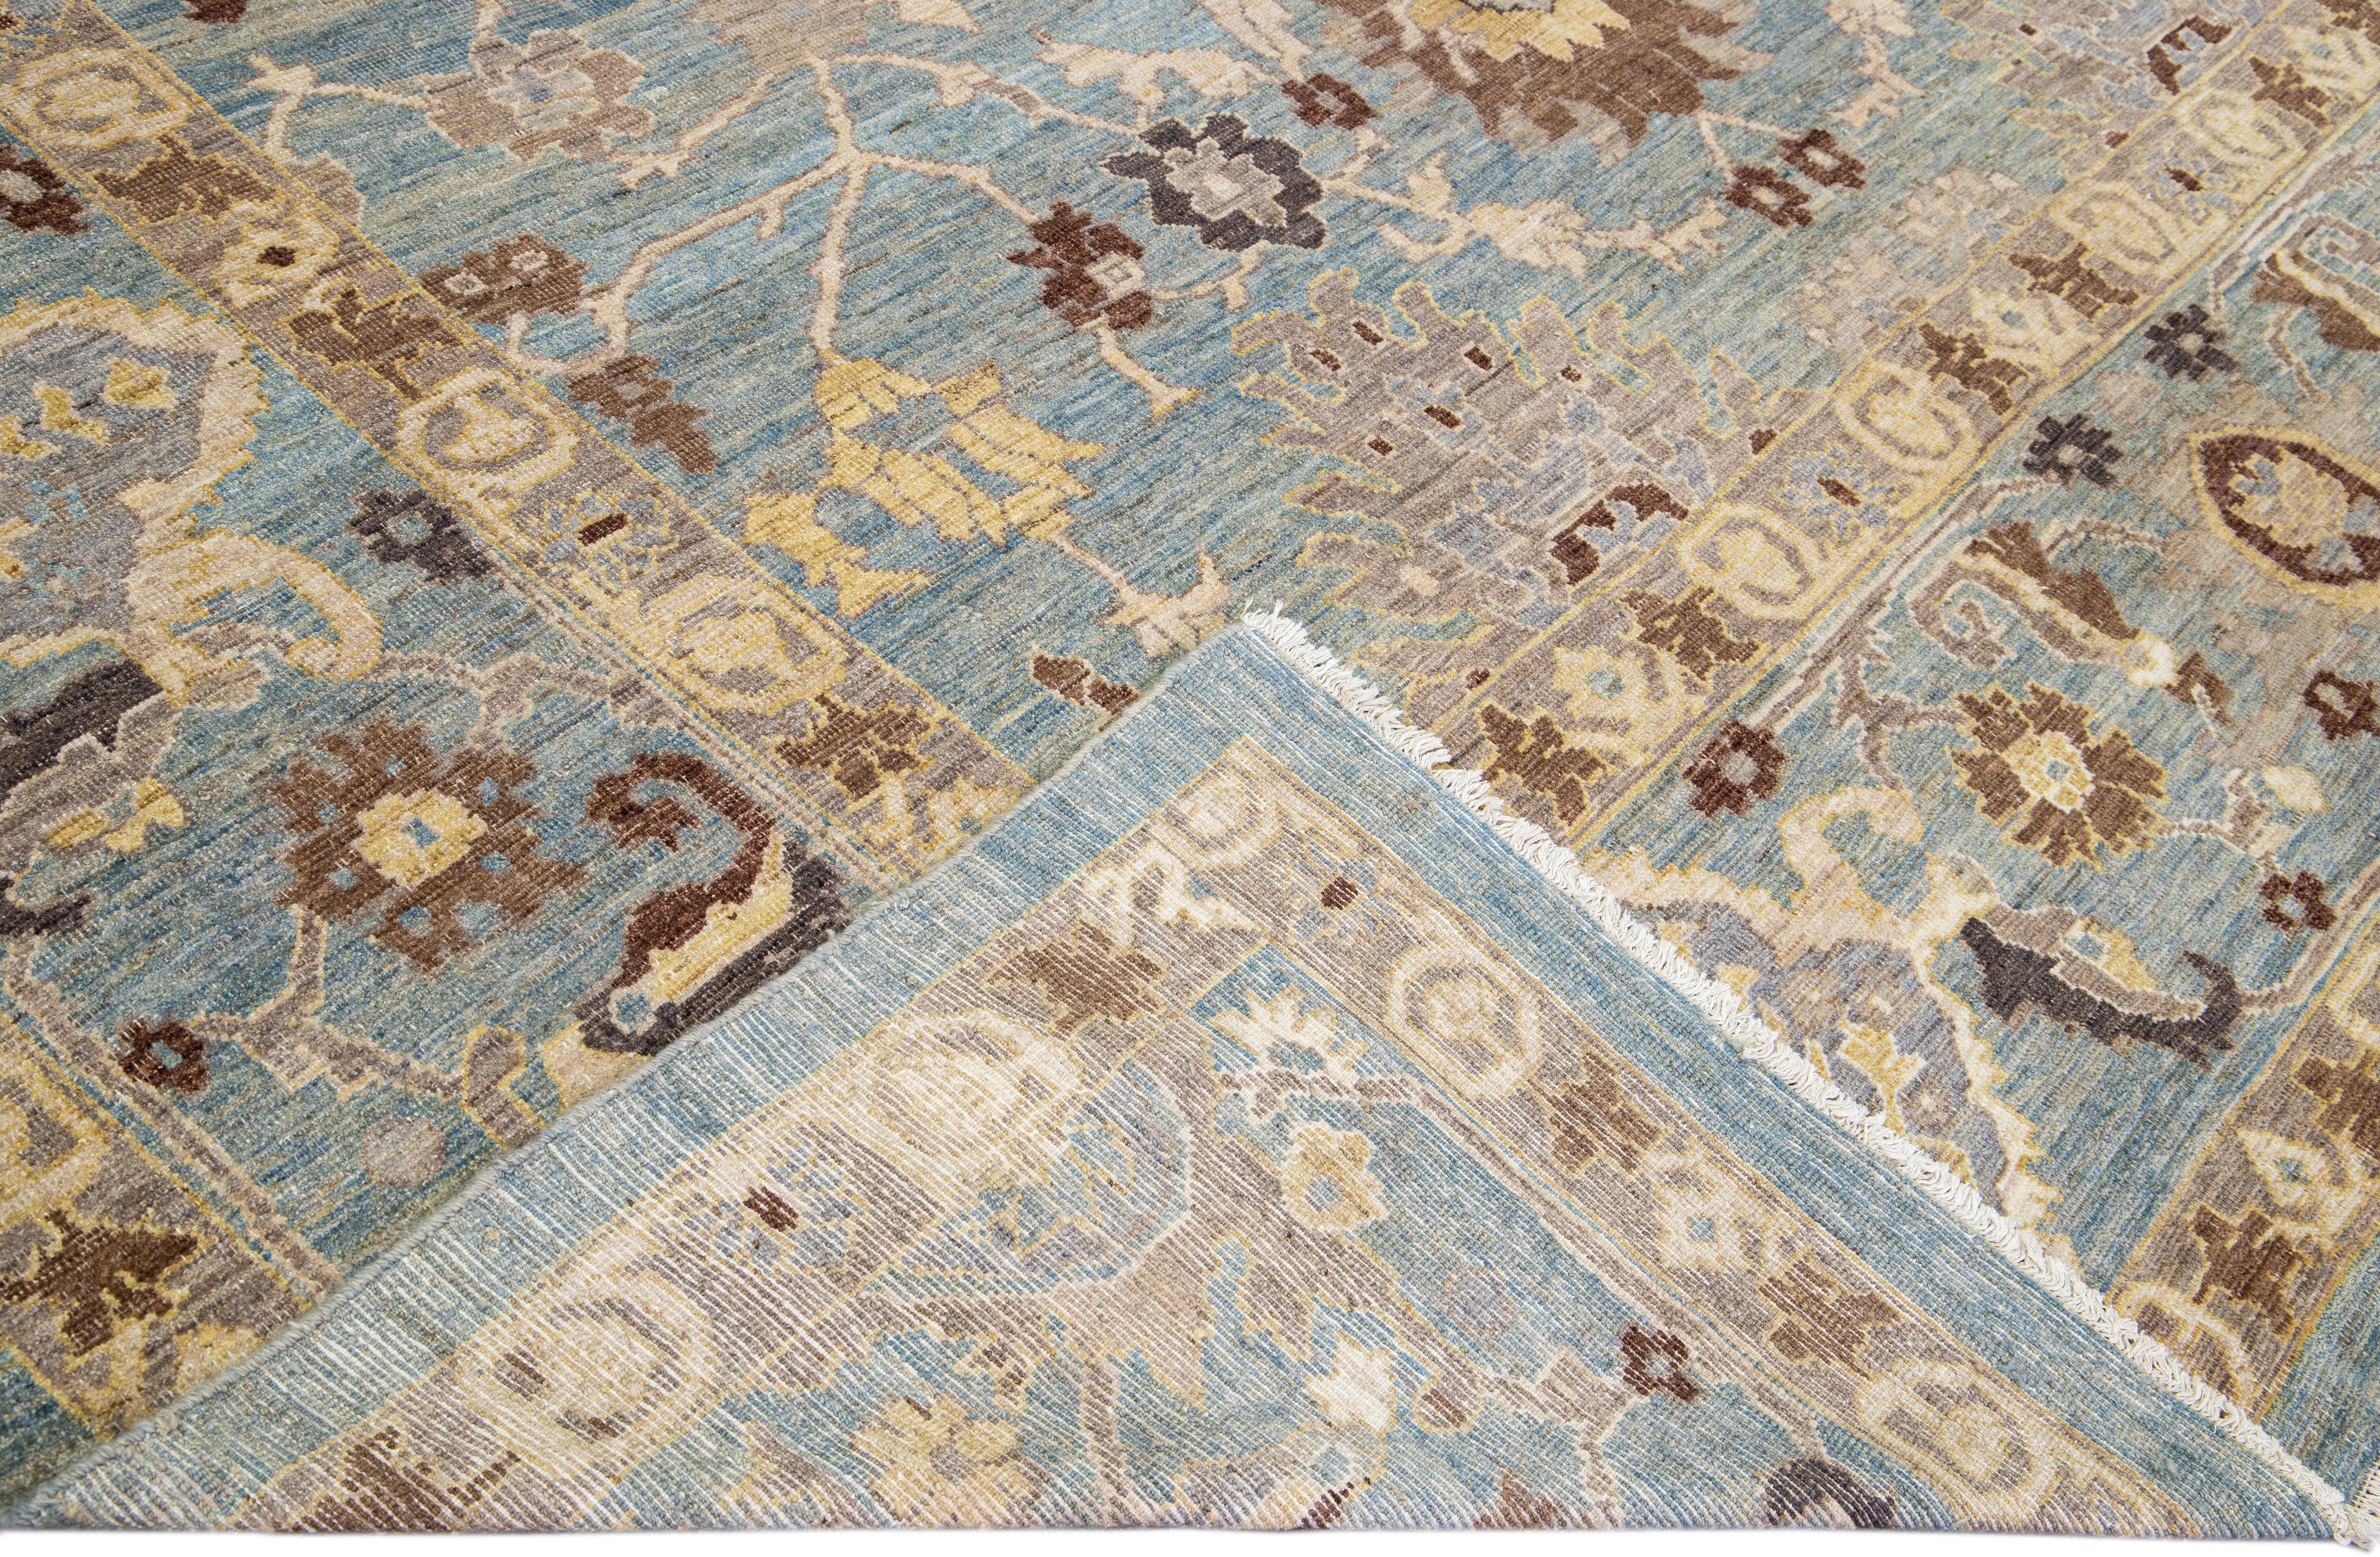 Beautiful modern Sultanabad hand-knotted wool rug with a blue field. This Sultanabad rug has brown, yellow, and beige accents in a gorgeous all-over Classic floral pattern design.

This rug measures: 12'5